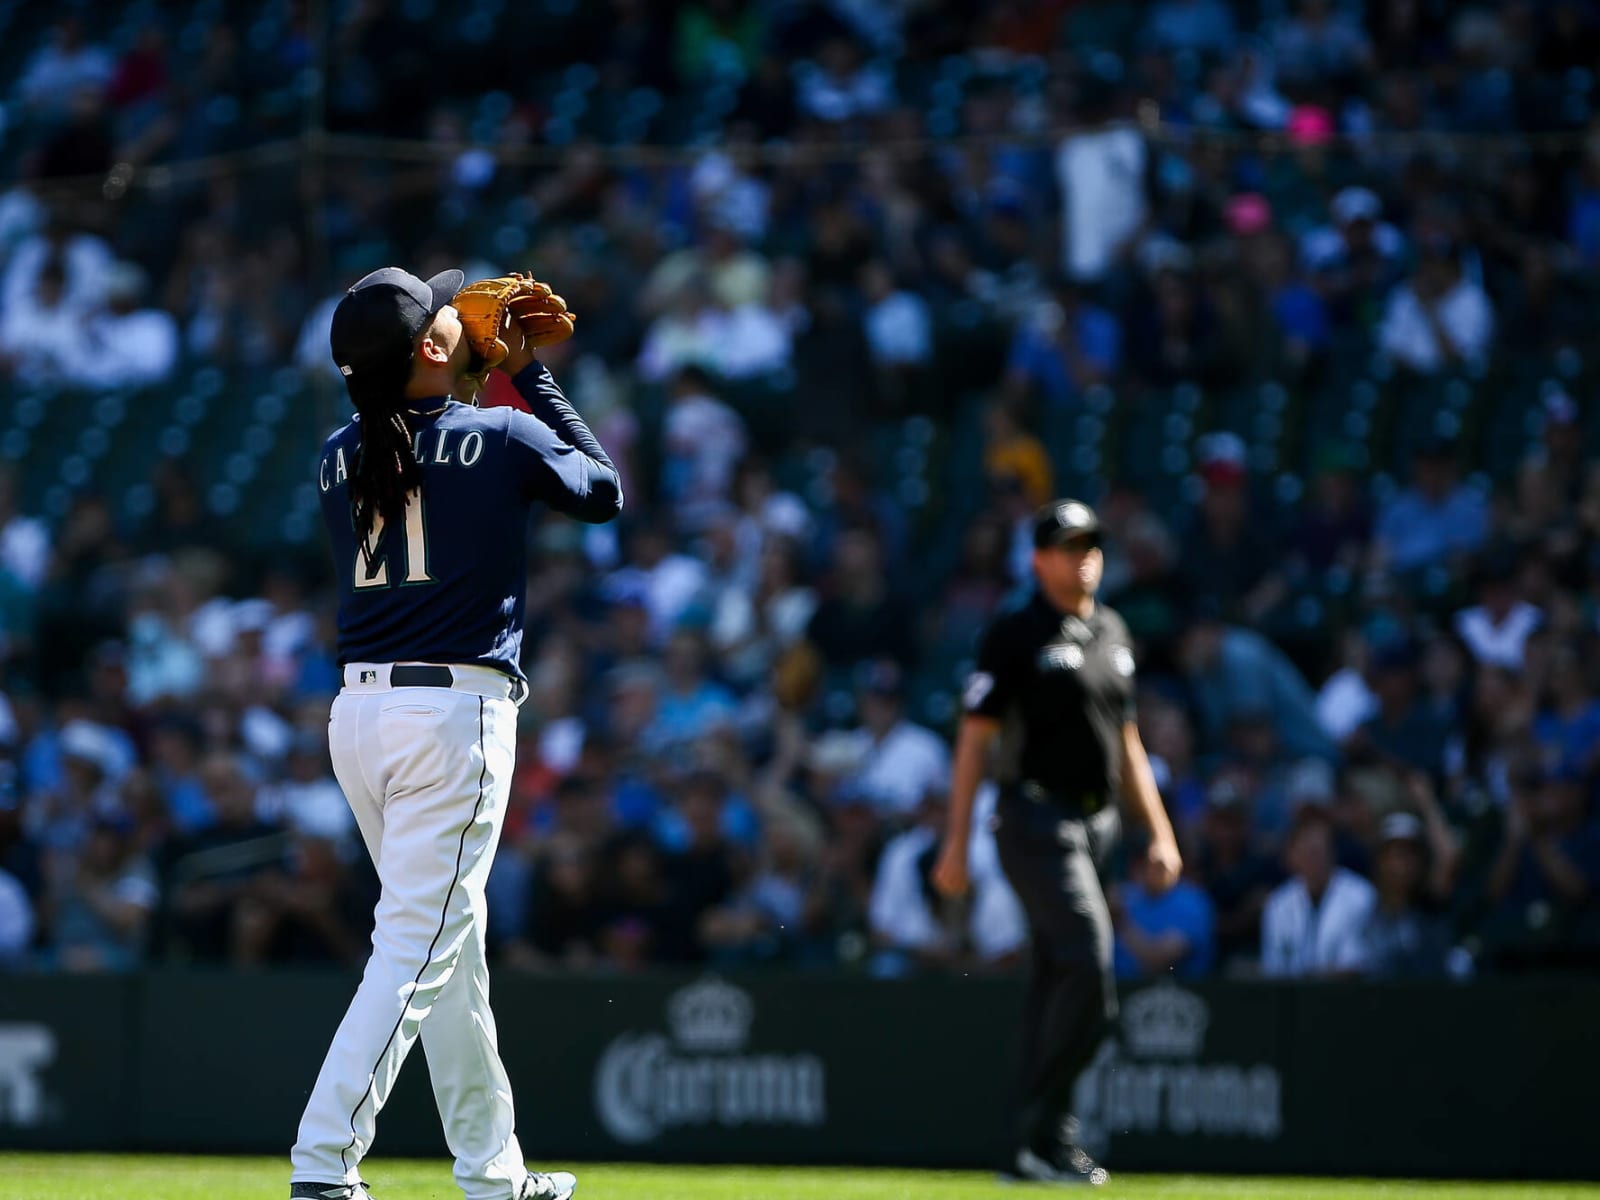 Mariners excited to see what Luis Castillo can accomplish with